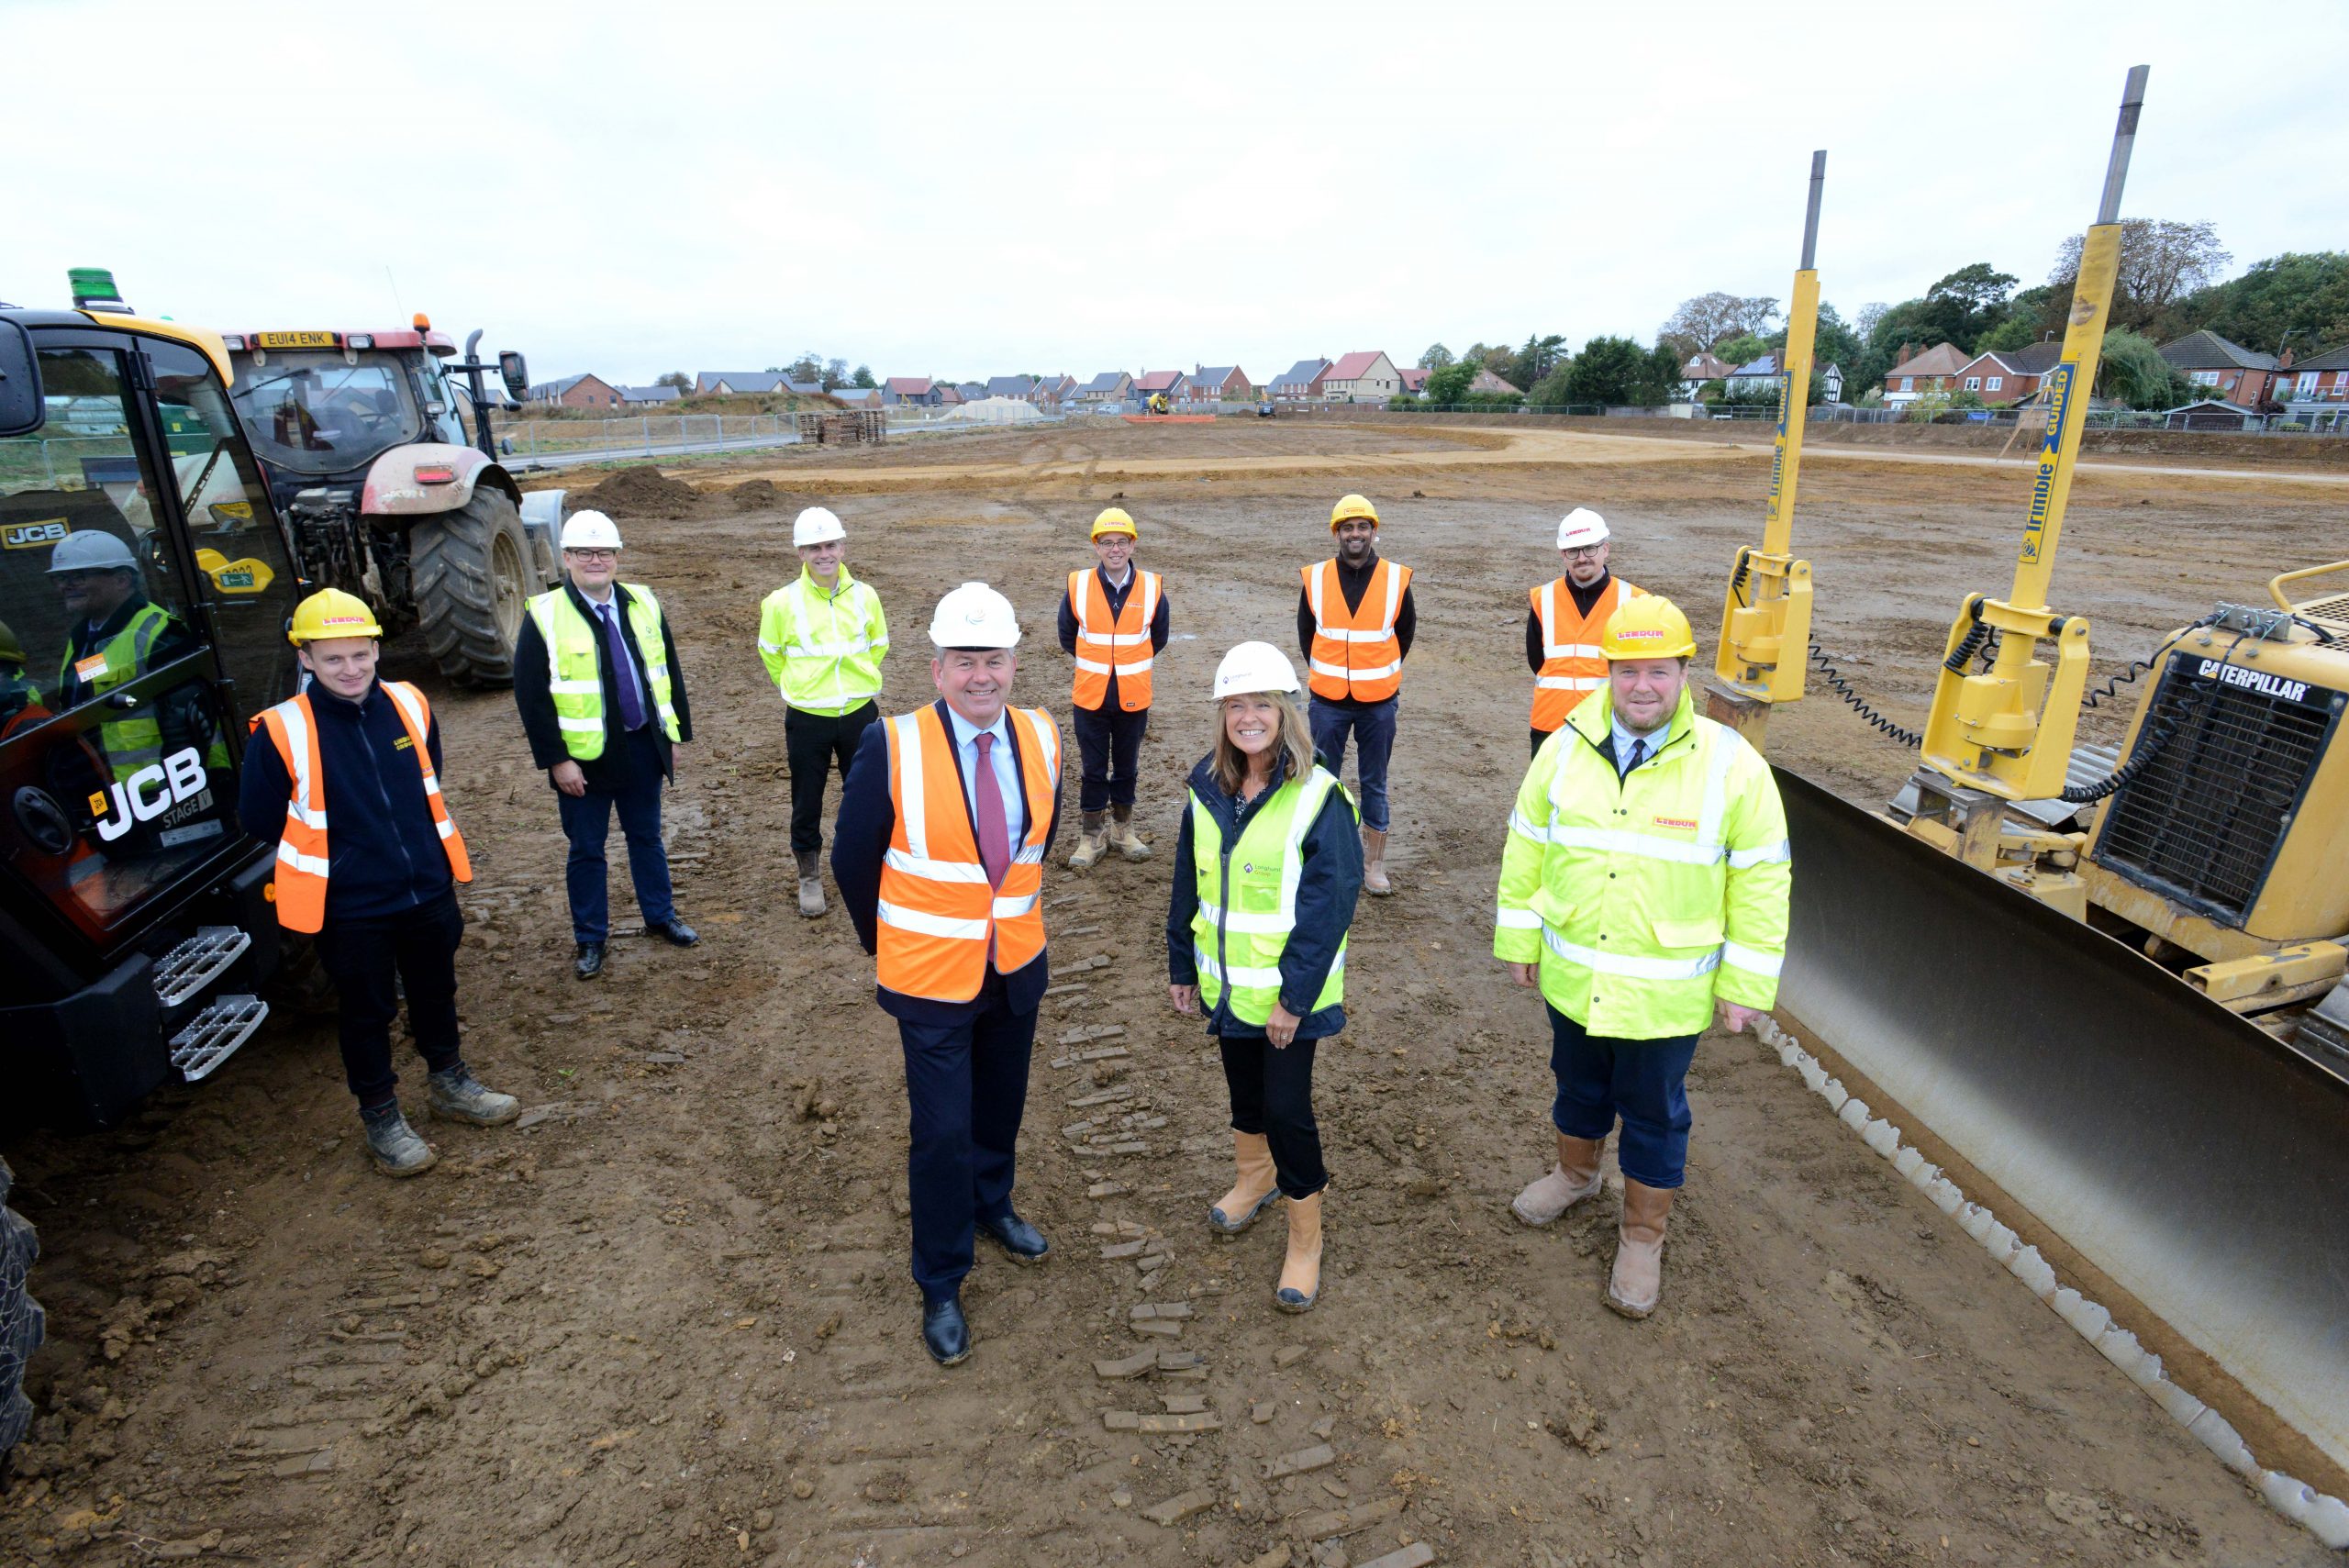 Work begins on new affordable homes at Handley Chase